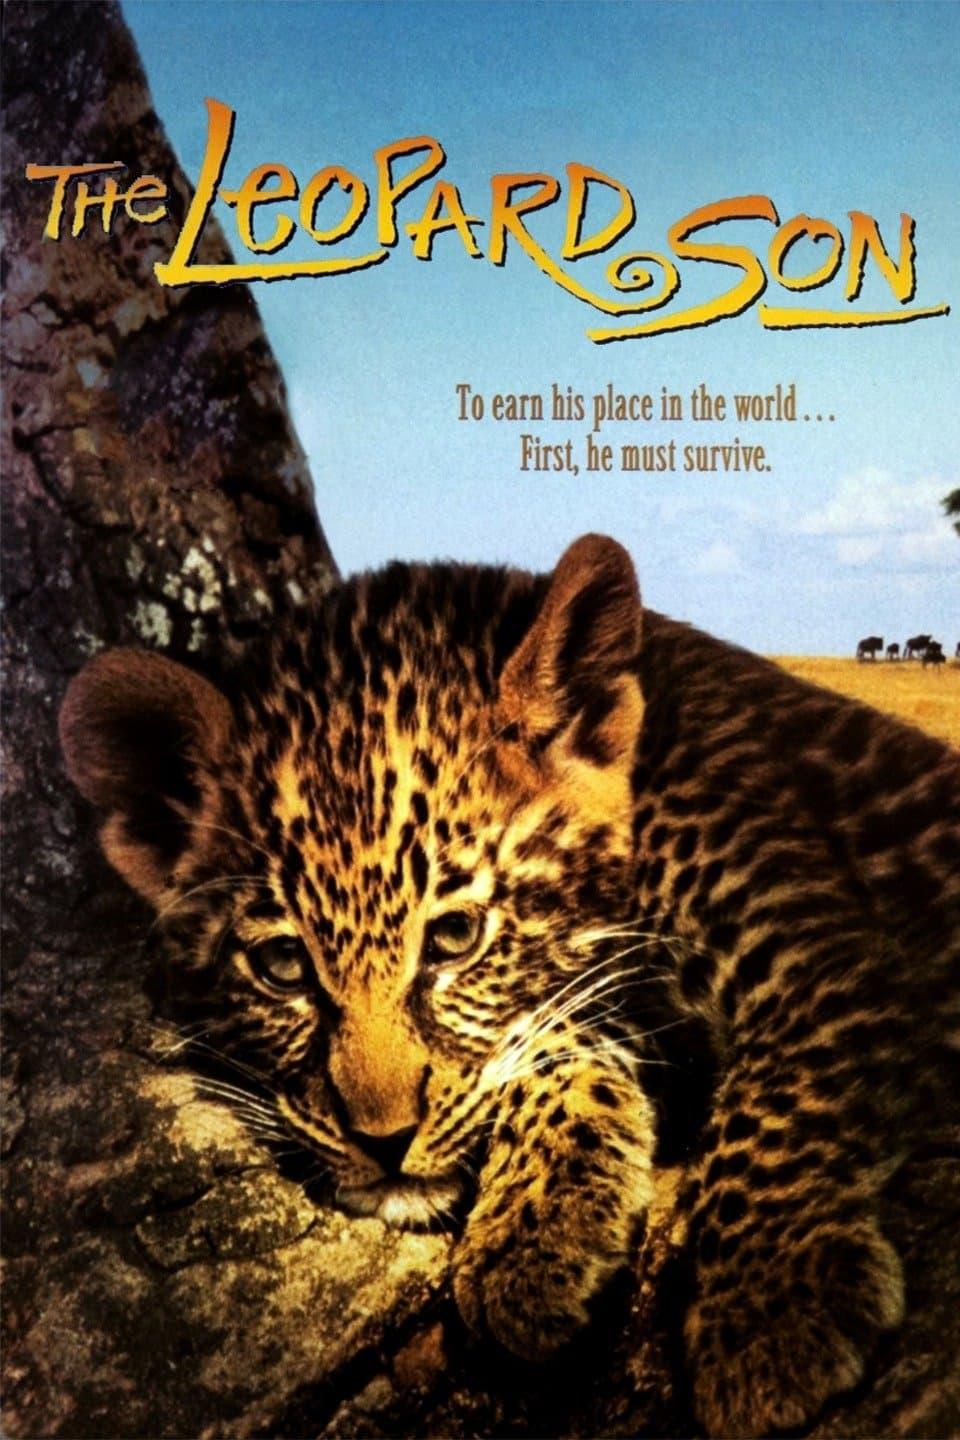 The Leopard Son poster